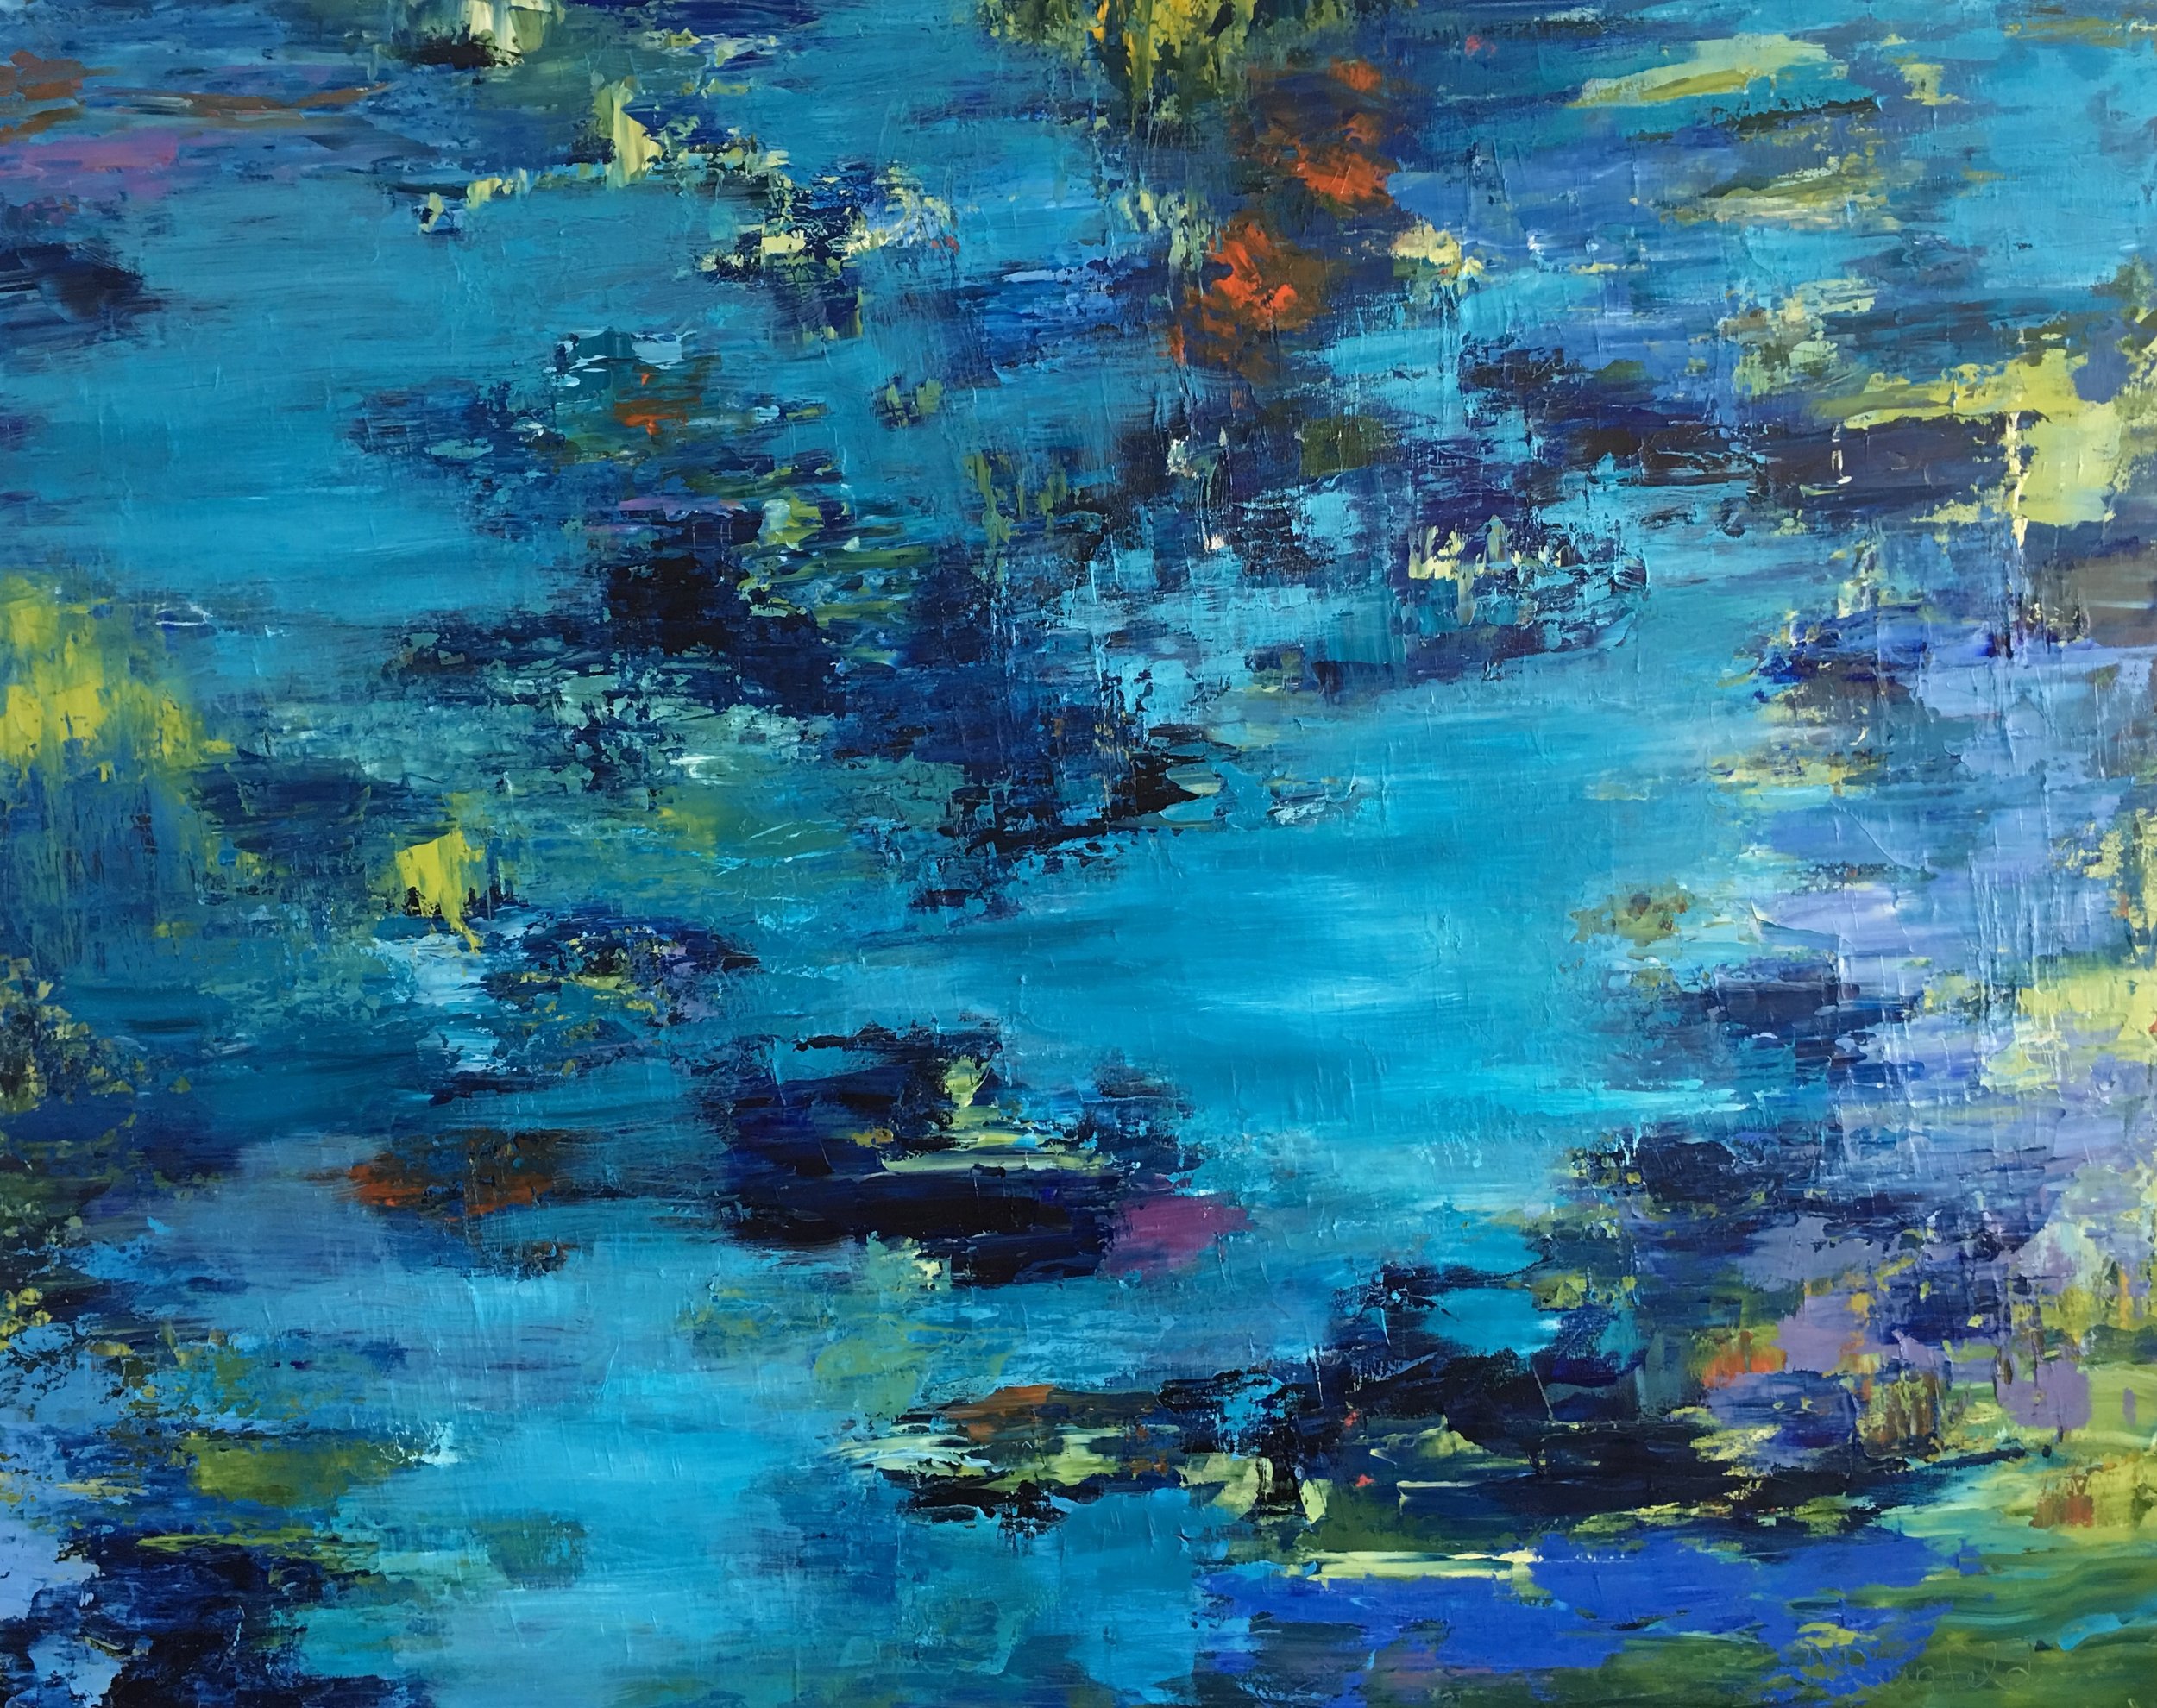 Letting Go, oil on canvas, 48"x60" SOLD